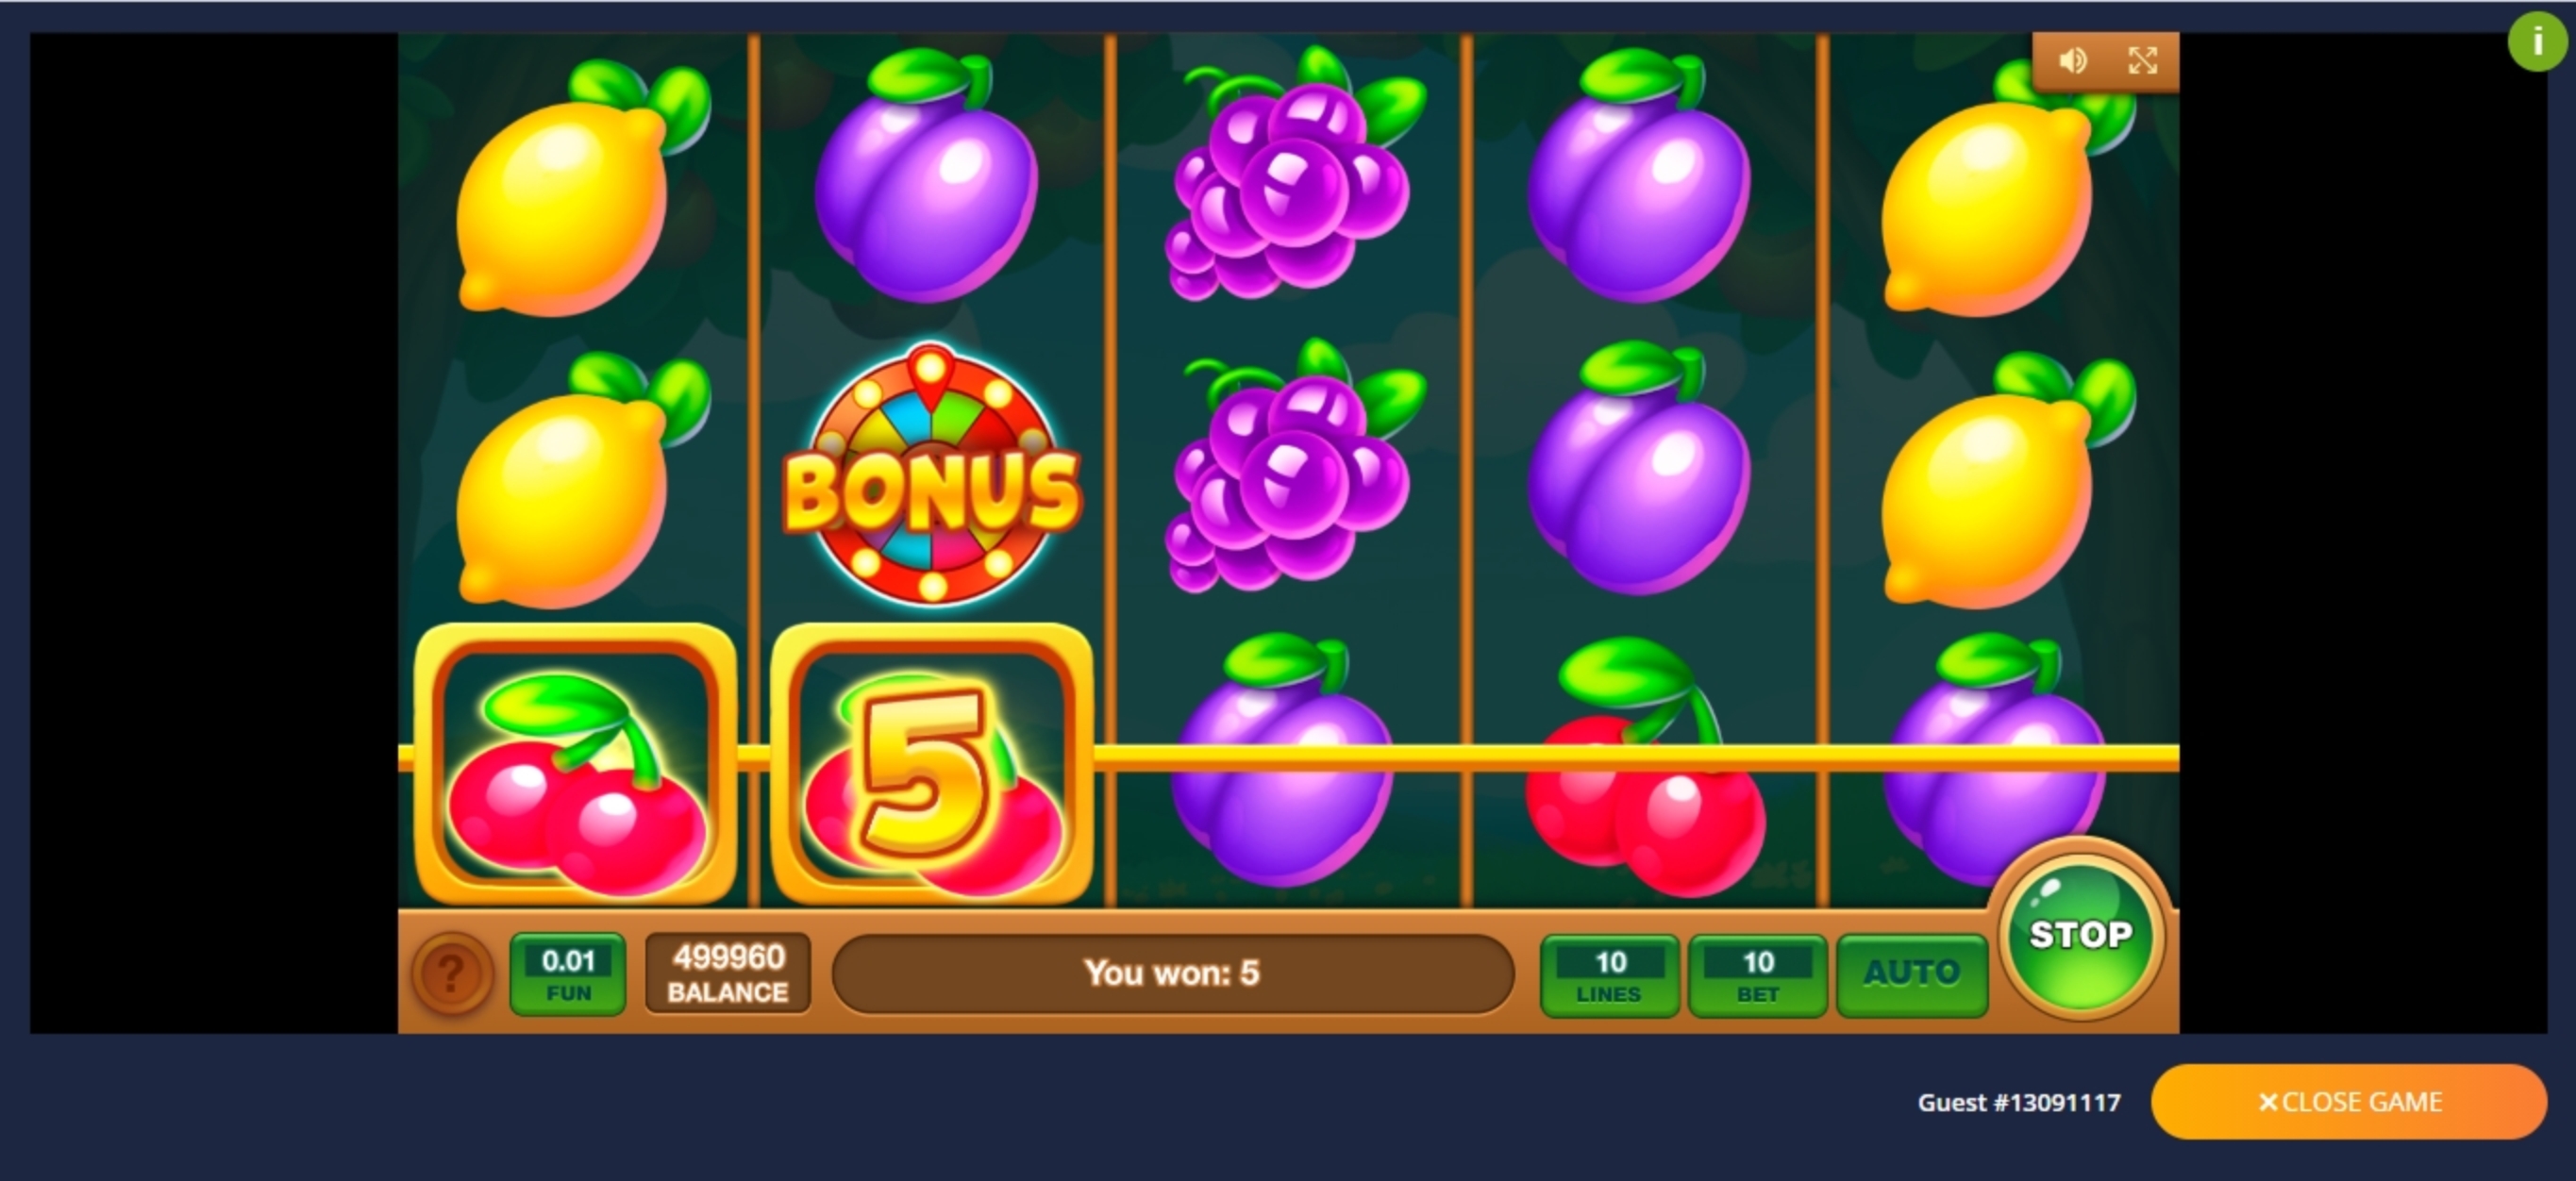 Win Money in Fruit Scapes Free Slot Game by Inbet Games